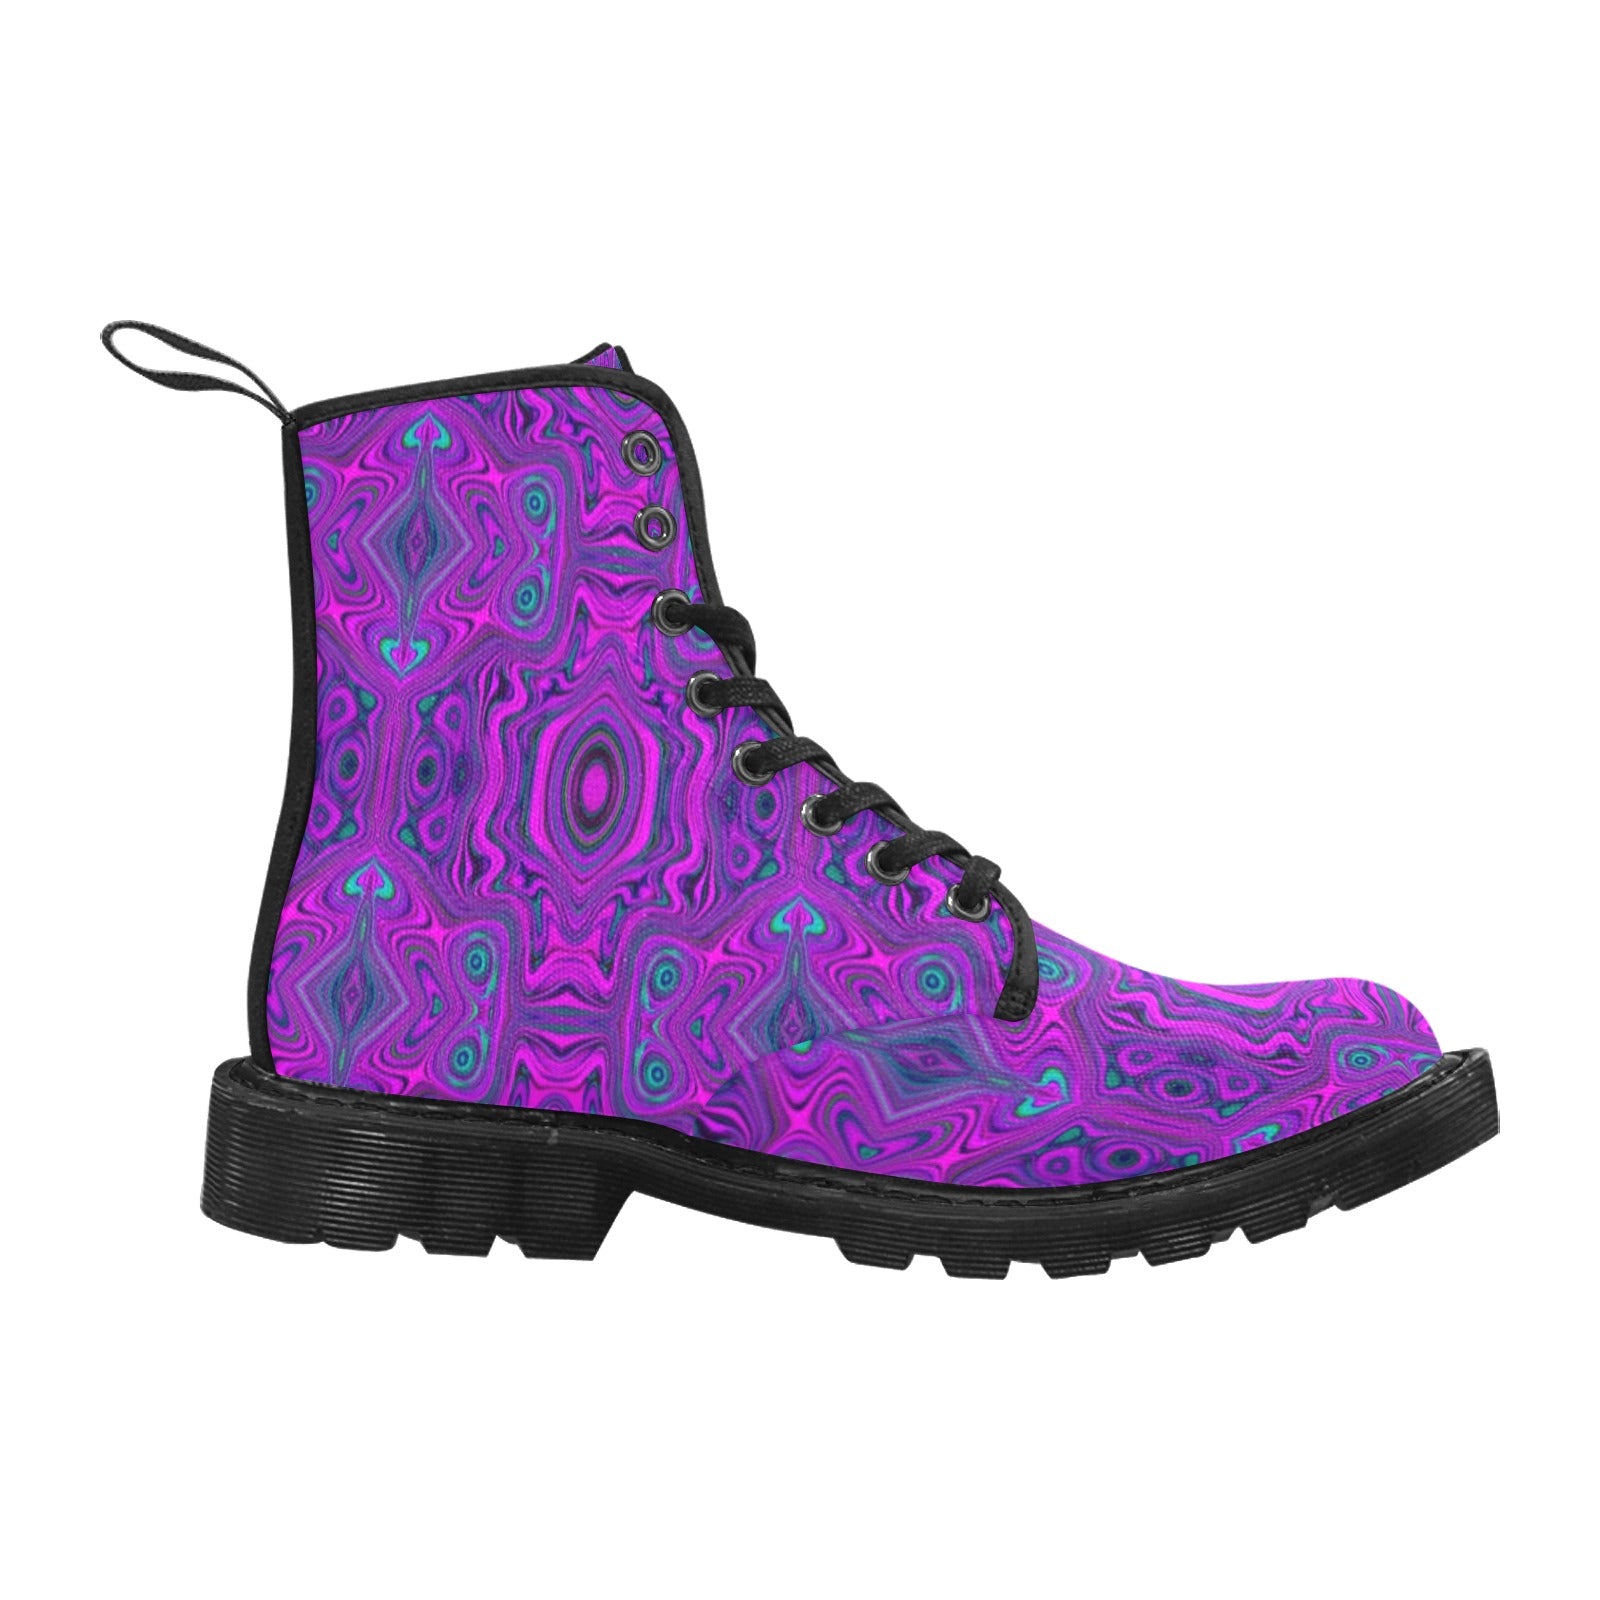 Boots for Women, Trippy Retro Magenta and Black Abstract Pattern - Black